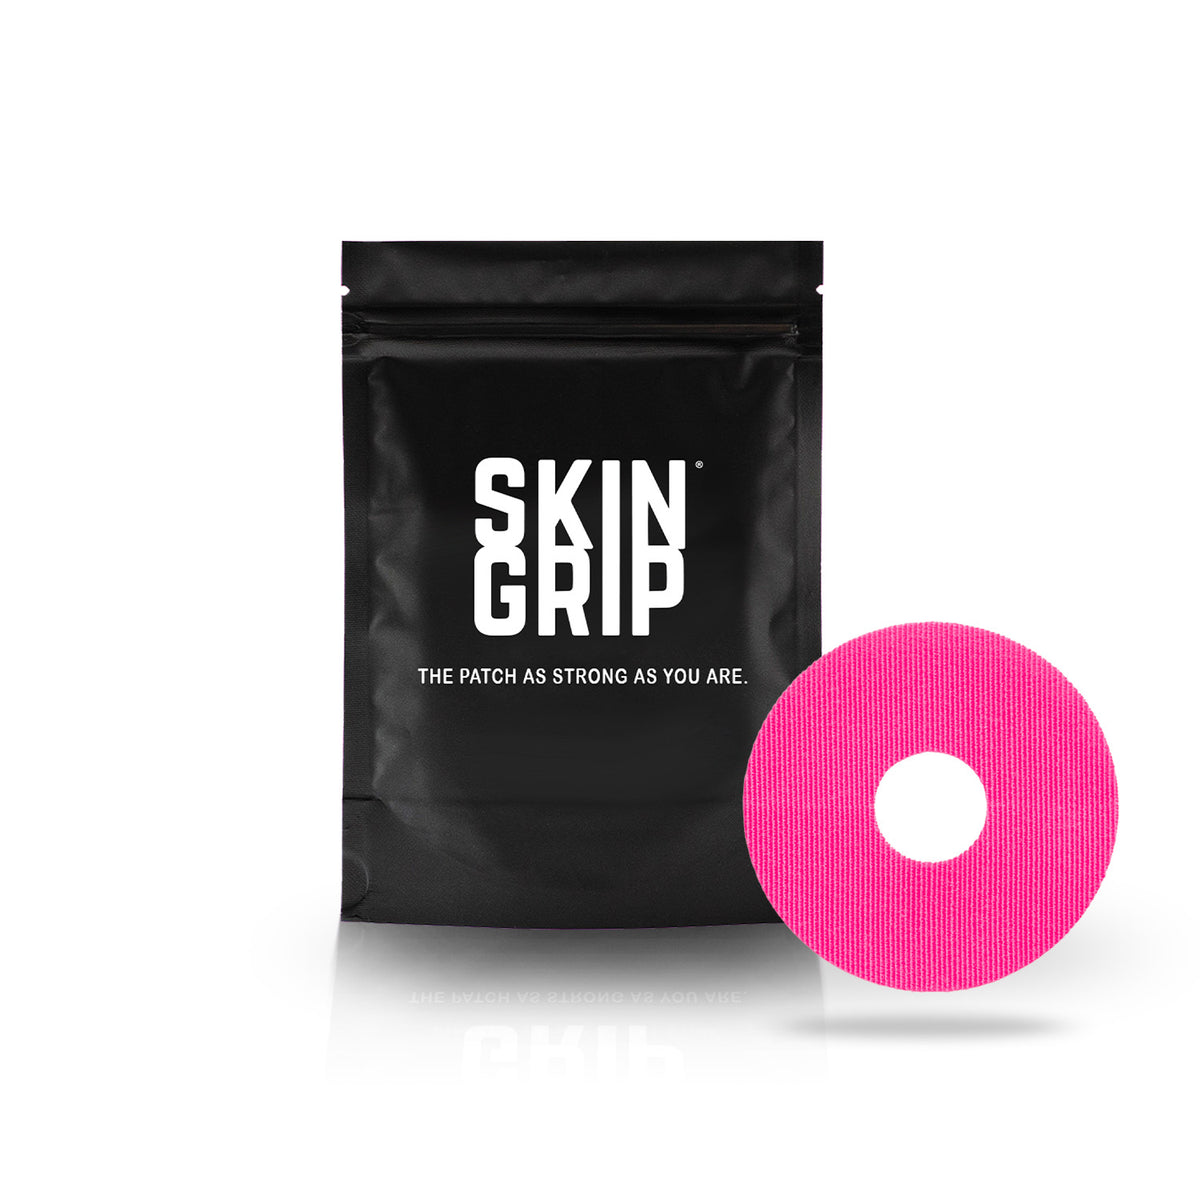 Skin Grip Original - Universal Adhesive Patches (0.8 inch Hole) - 20 Pack